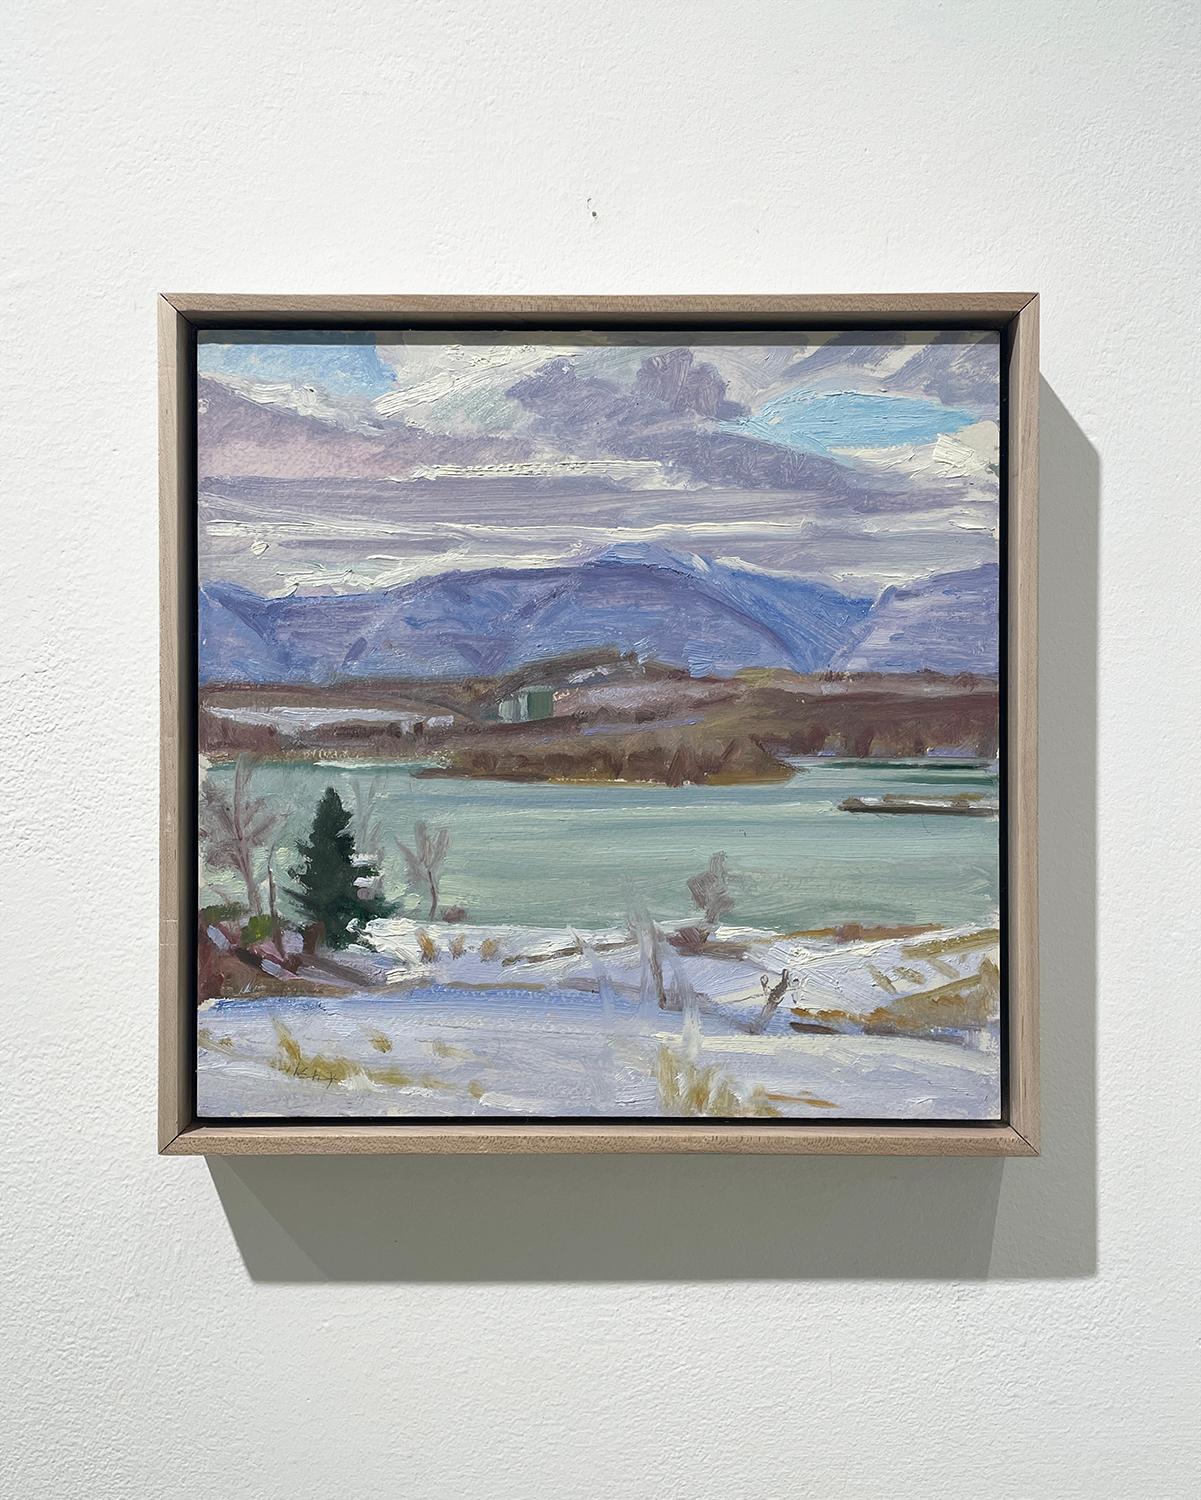 Gestural, en plein air winter landscape painting of the Hudson River Valley and Catskill Mountains
Painted in January of 2024, by Hudson Valley based artist, John Kelly
oil on panel, signed on verso
10 x 10 inches / 11 x 11.5 inches framed

The